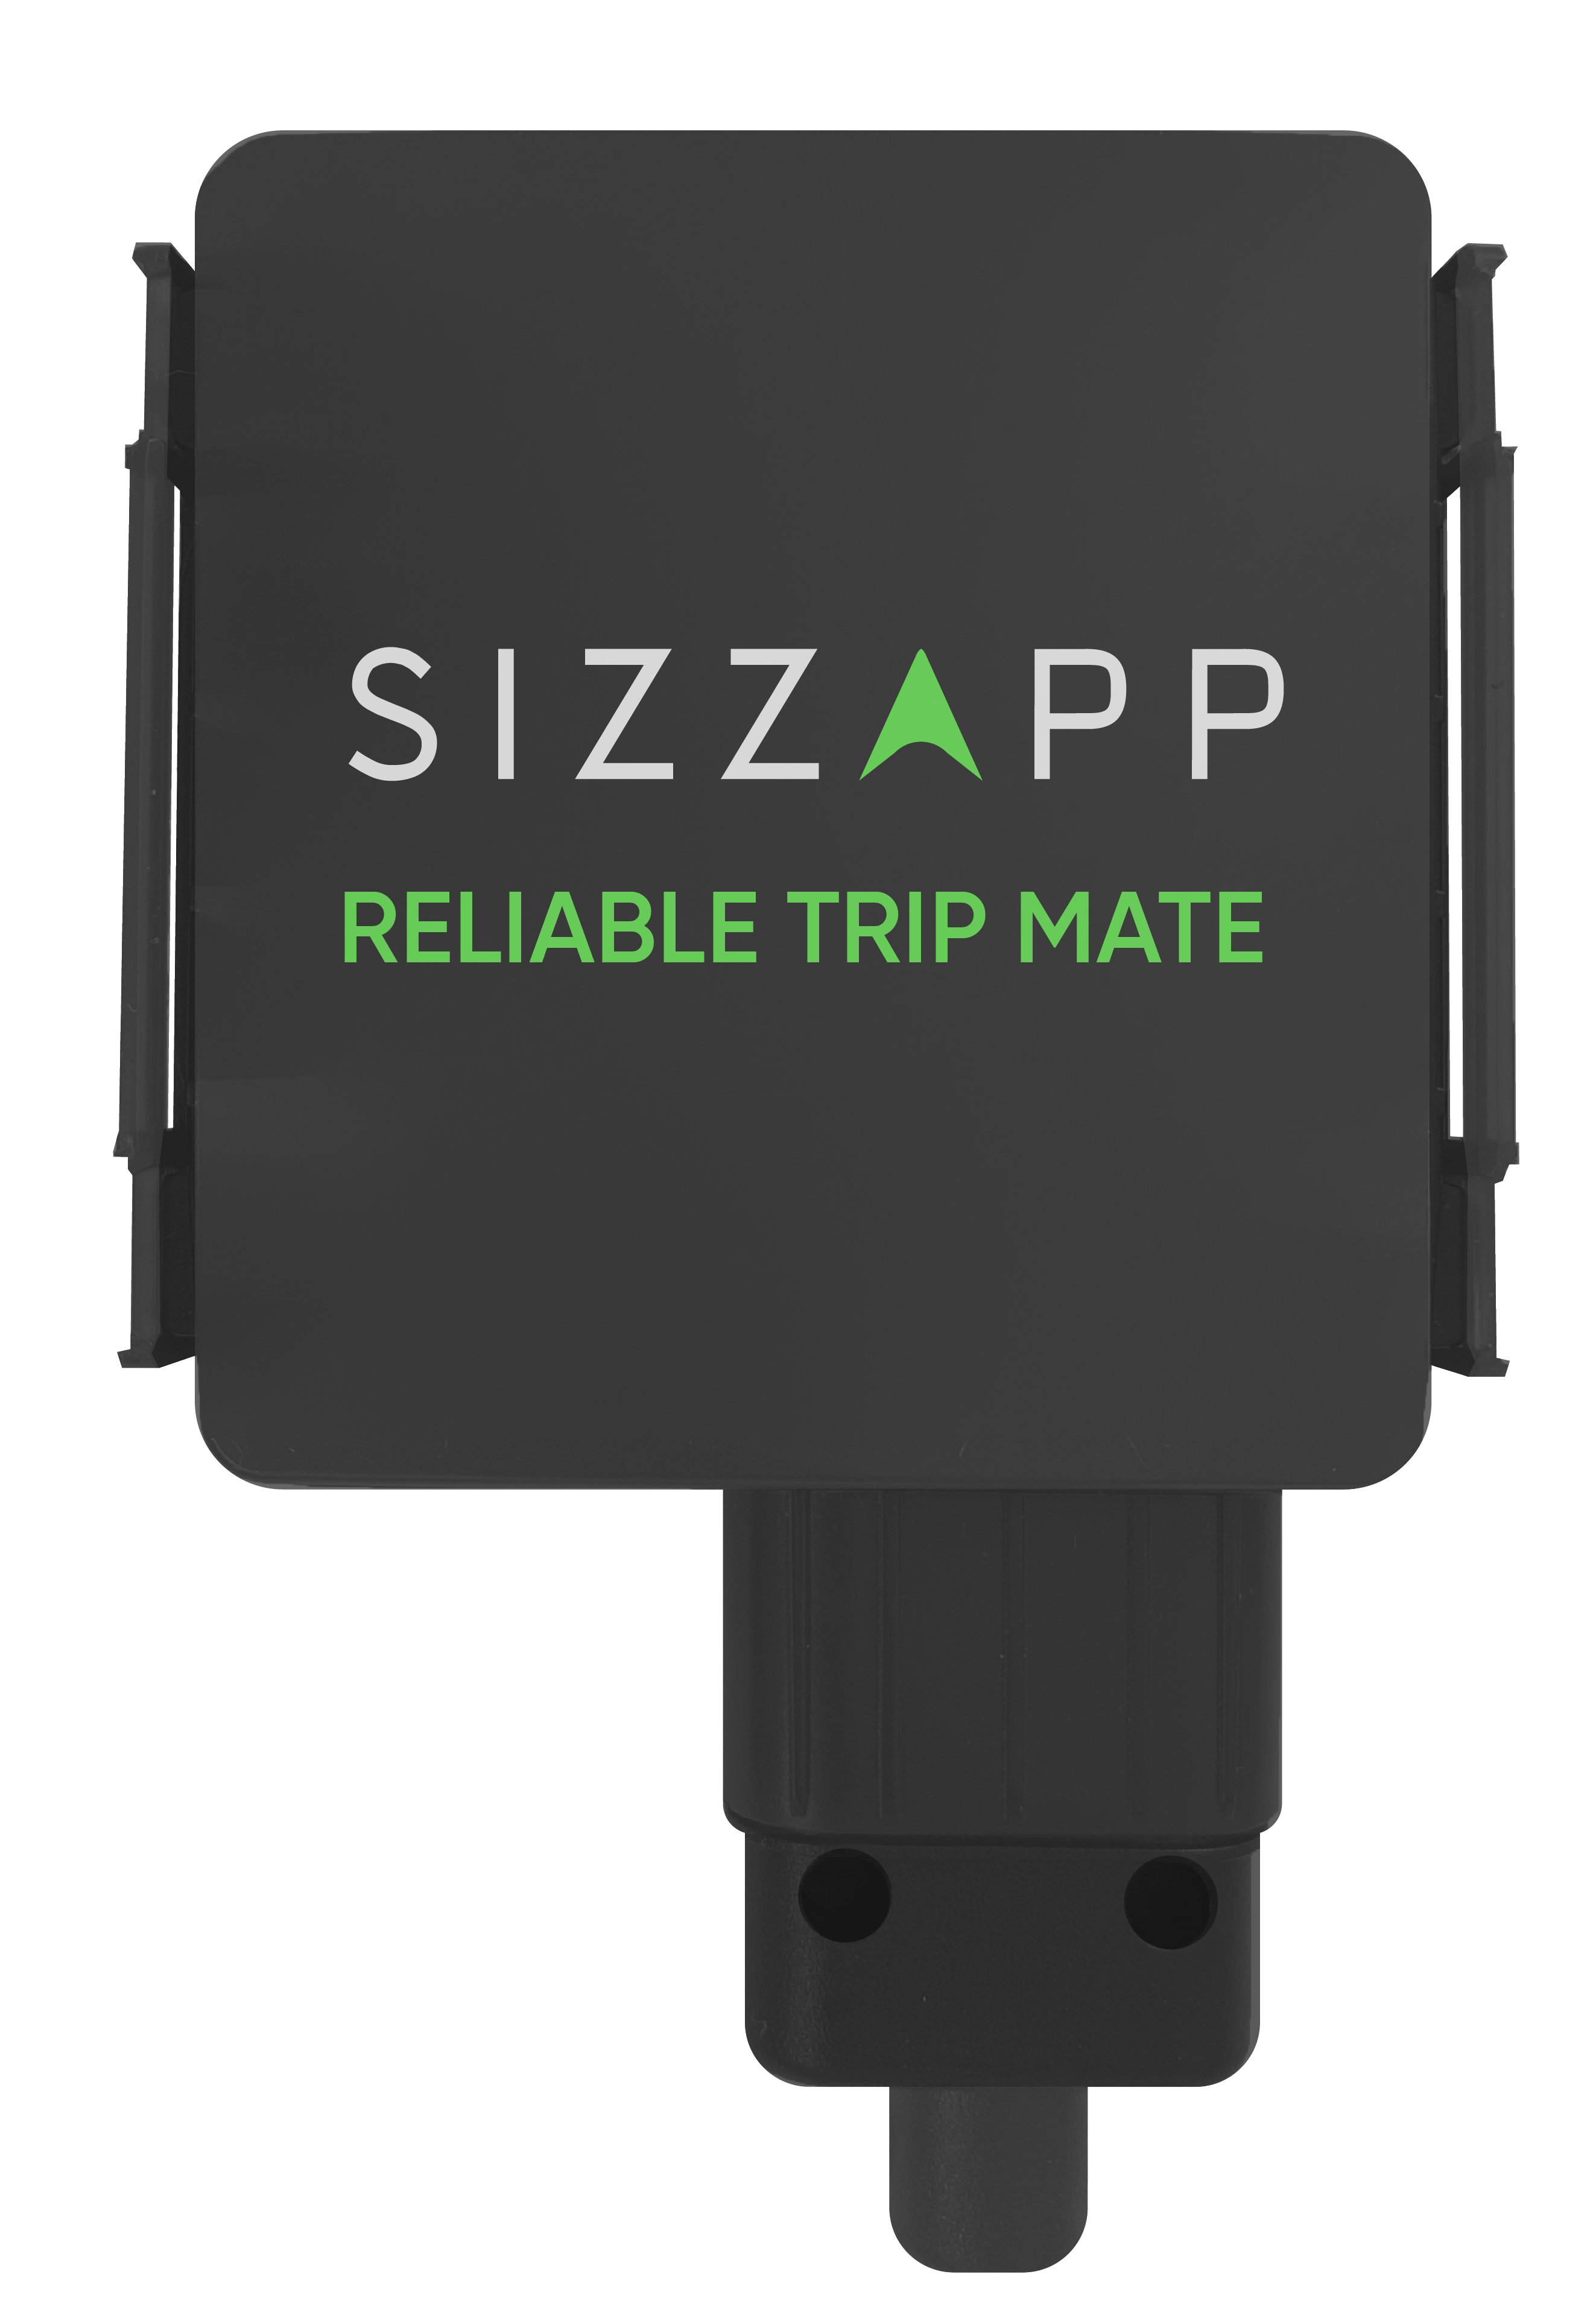 SizzApp: Track, Monitor, and Locate Your Vehicle